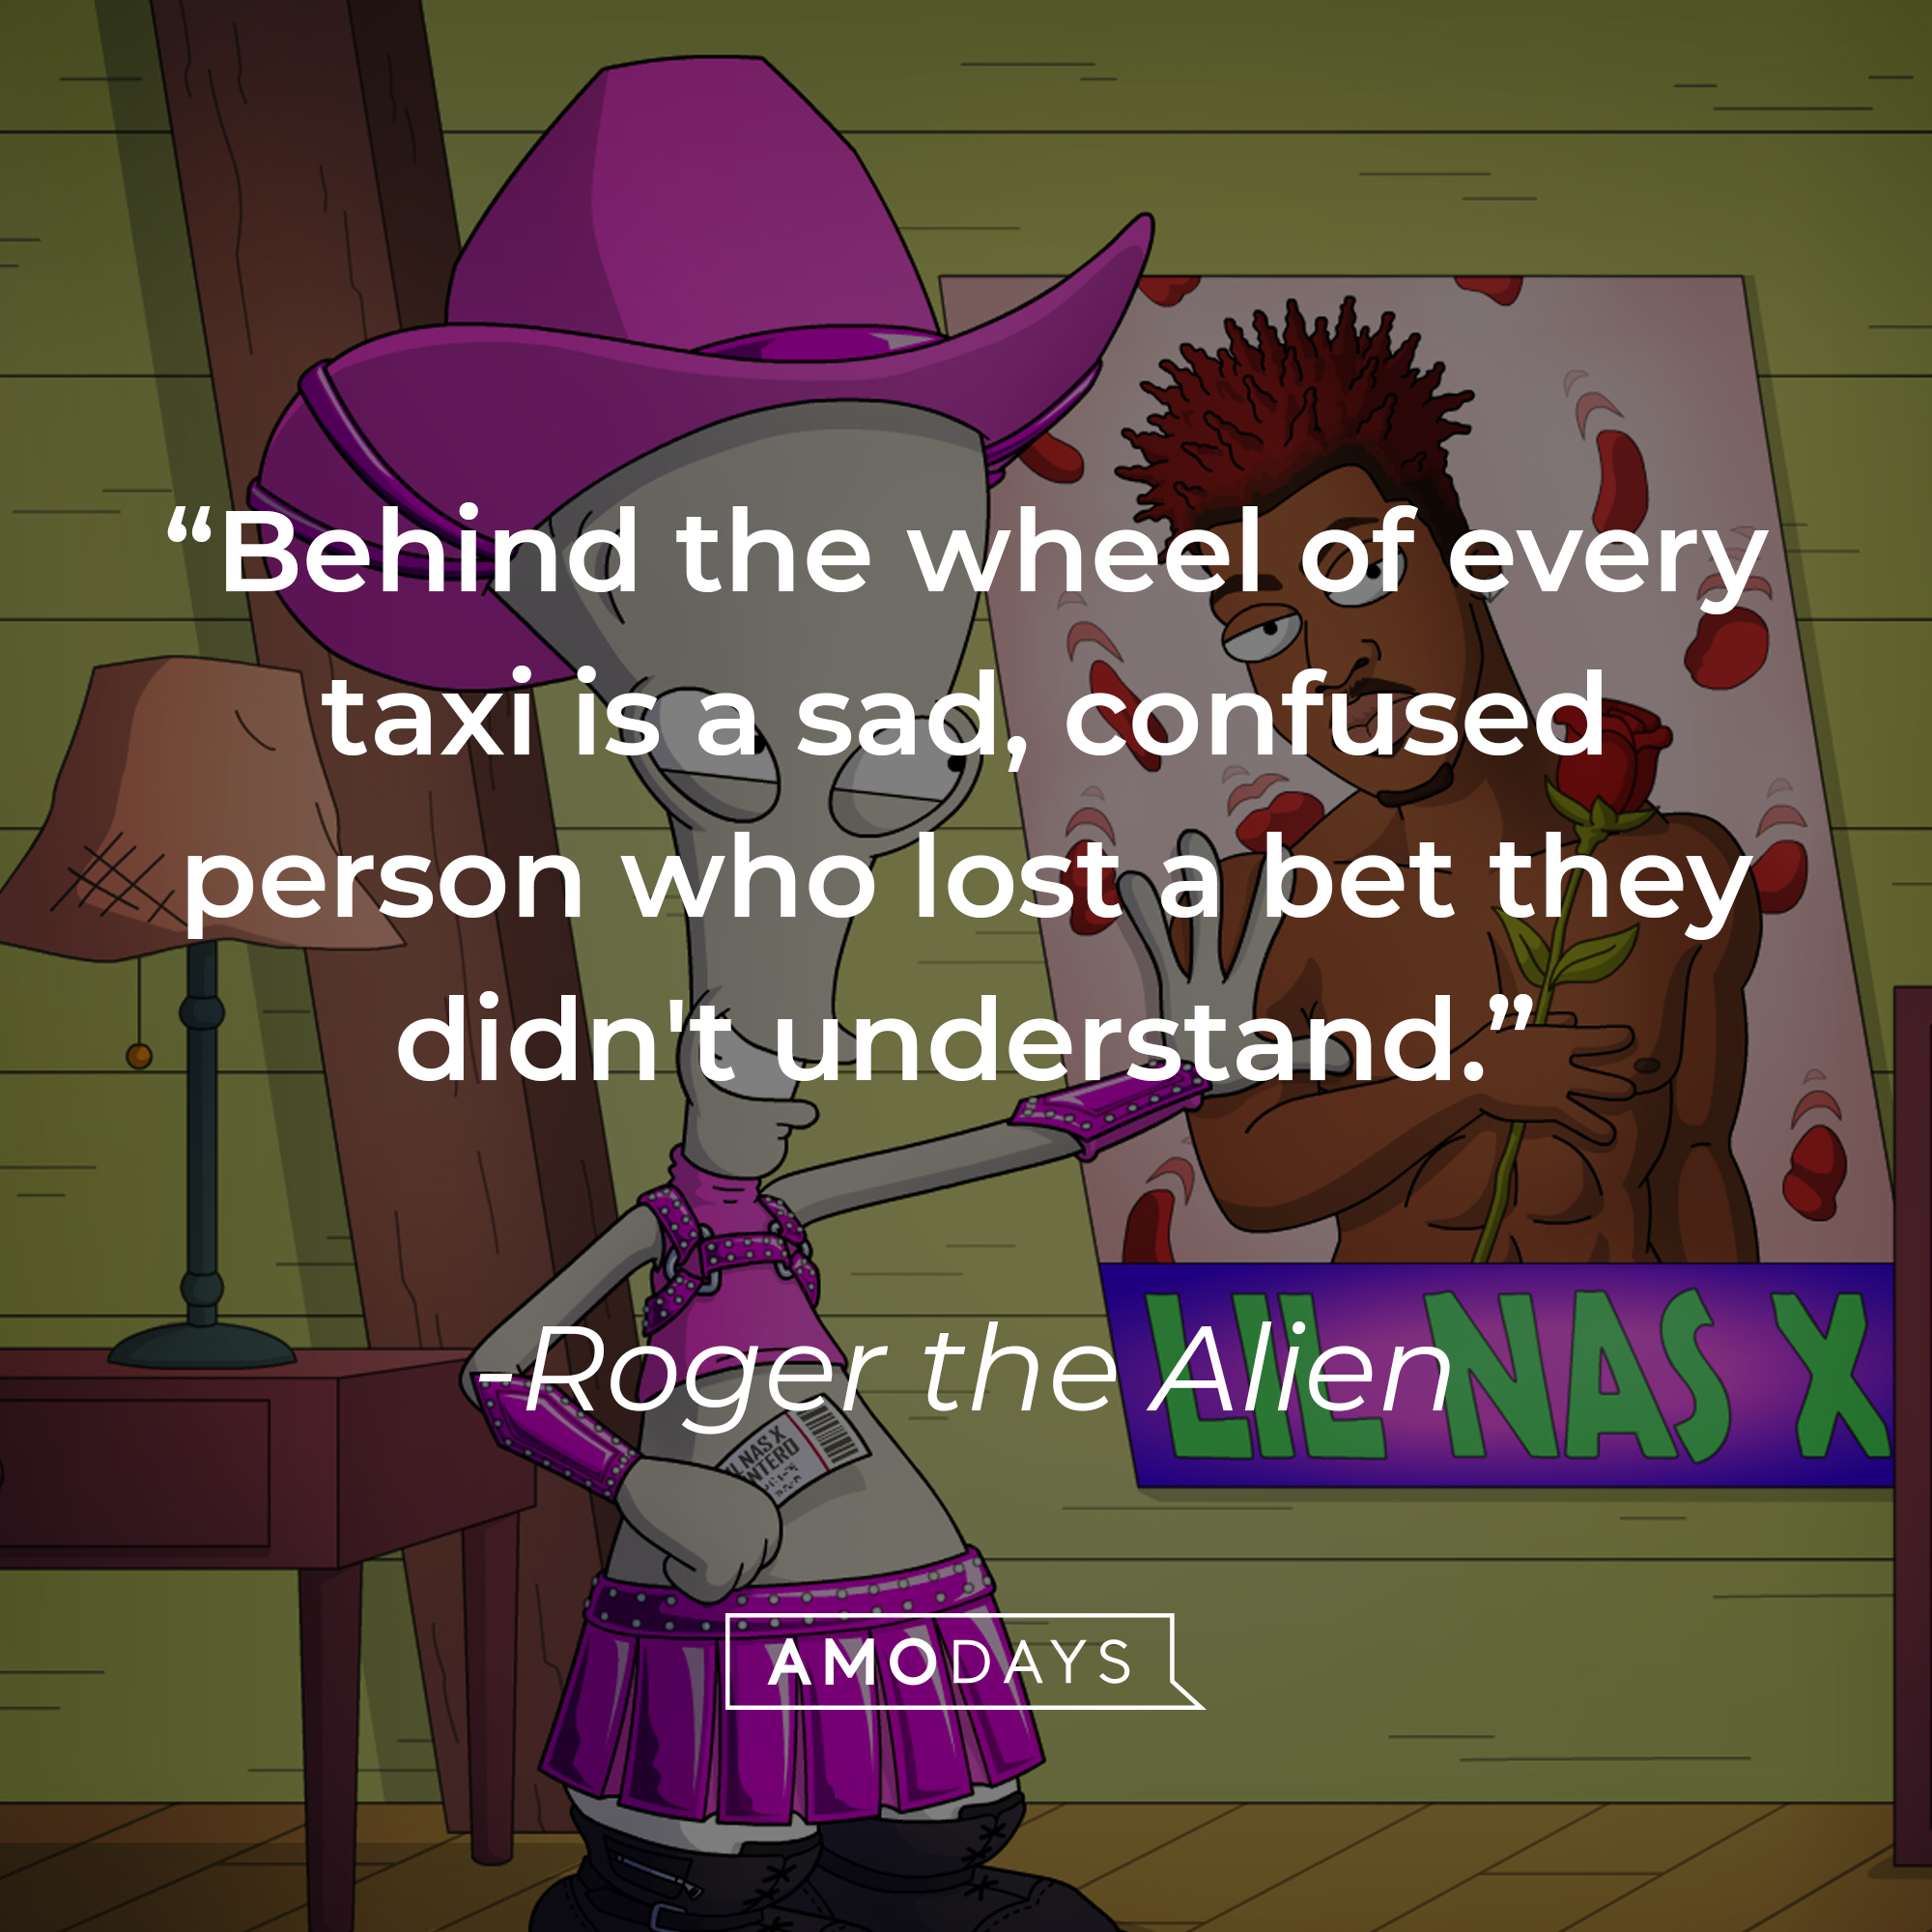 Roger the Alien with his quote: “Behind the wheel of every taxi is a sad, confused person who lost a bet they didn't understand.” | Source: facebook.com/AmericanDad